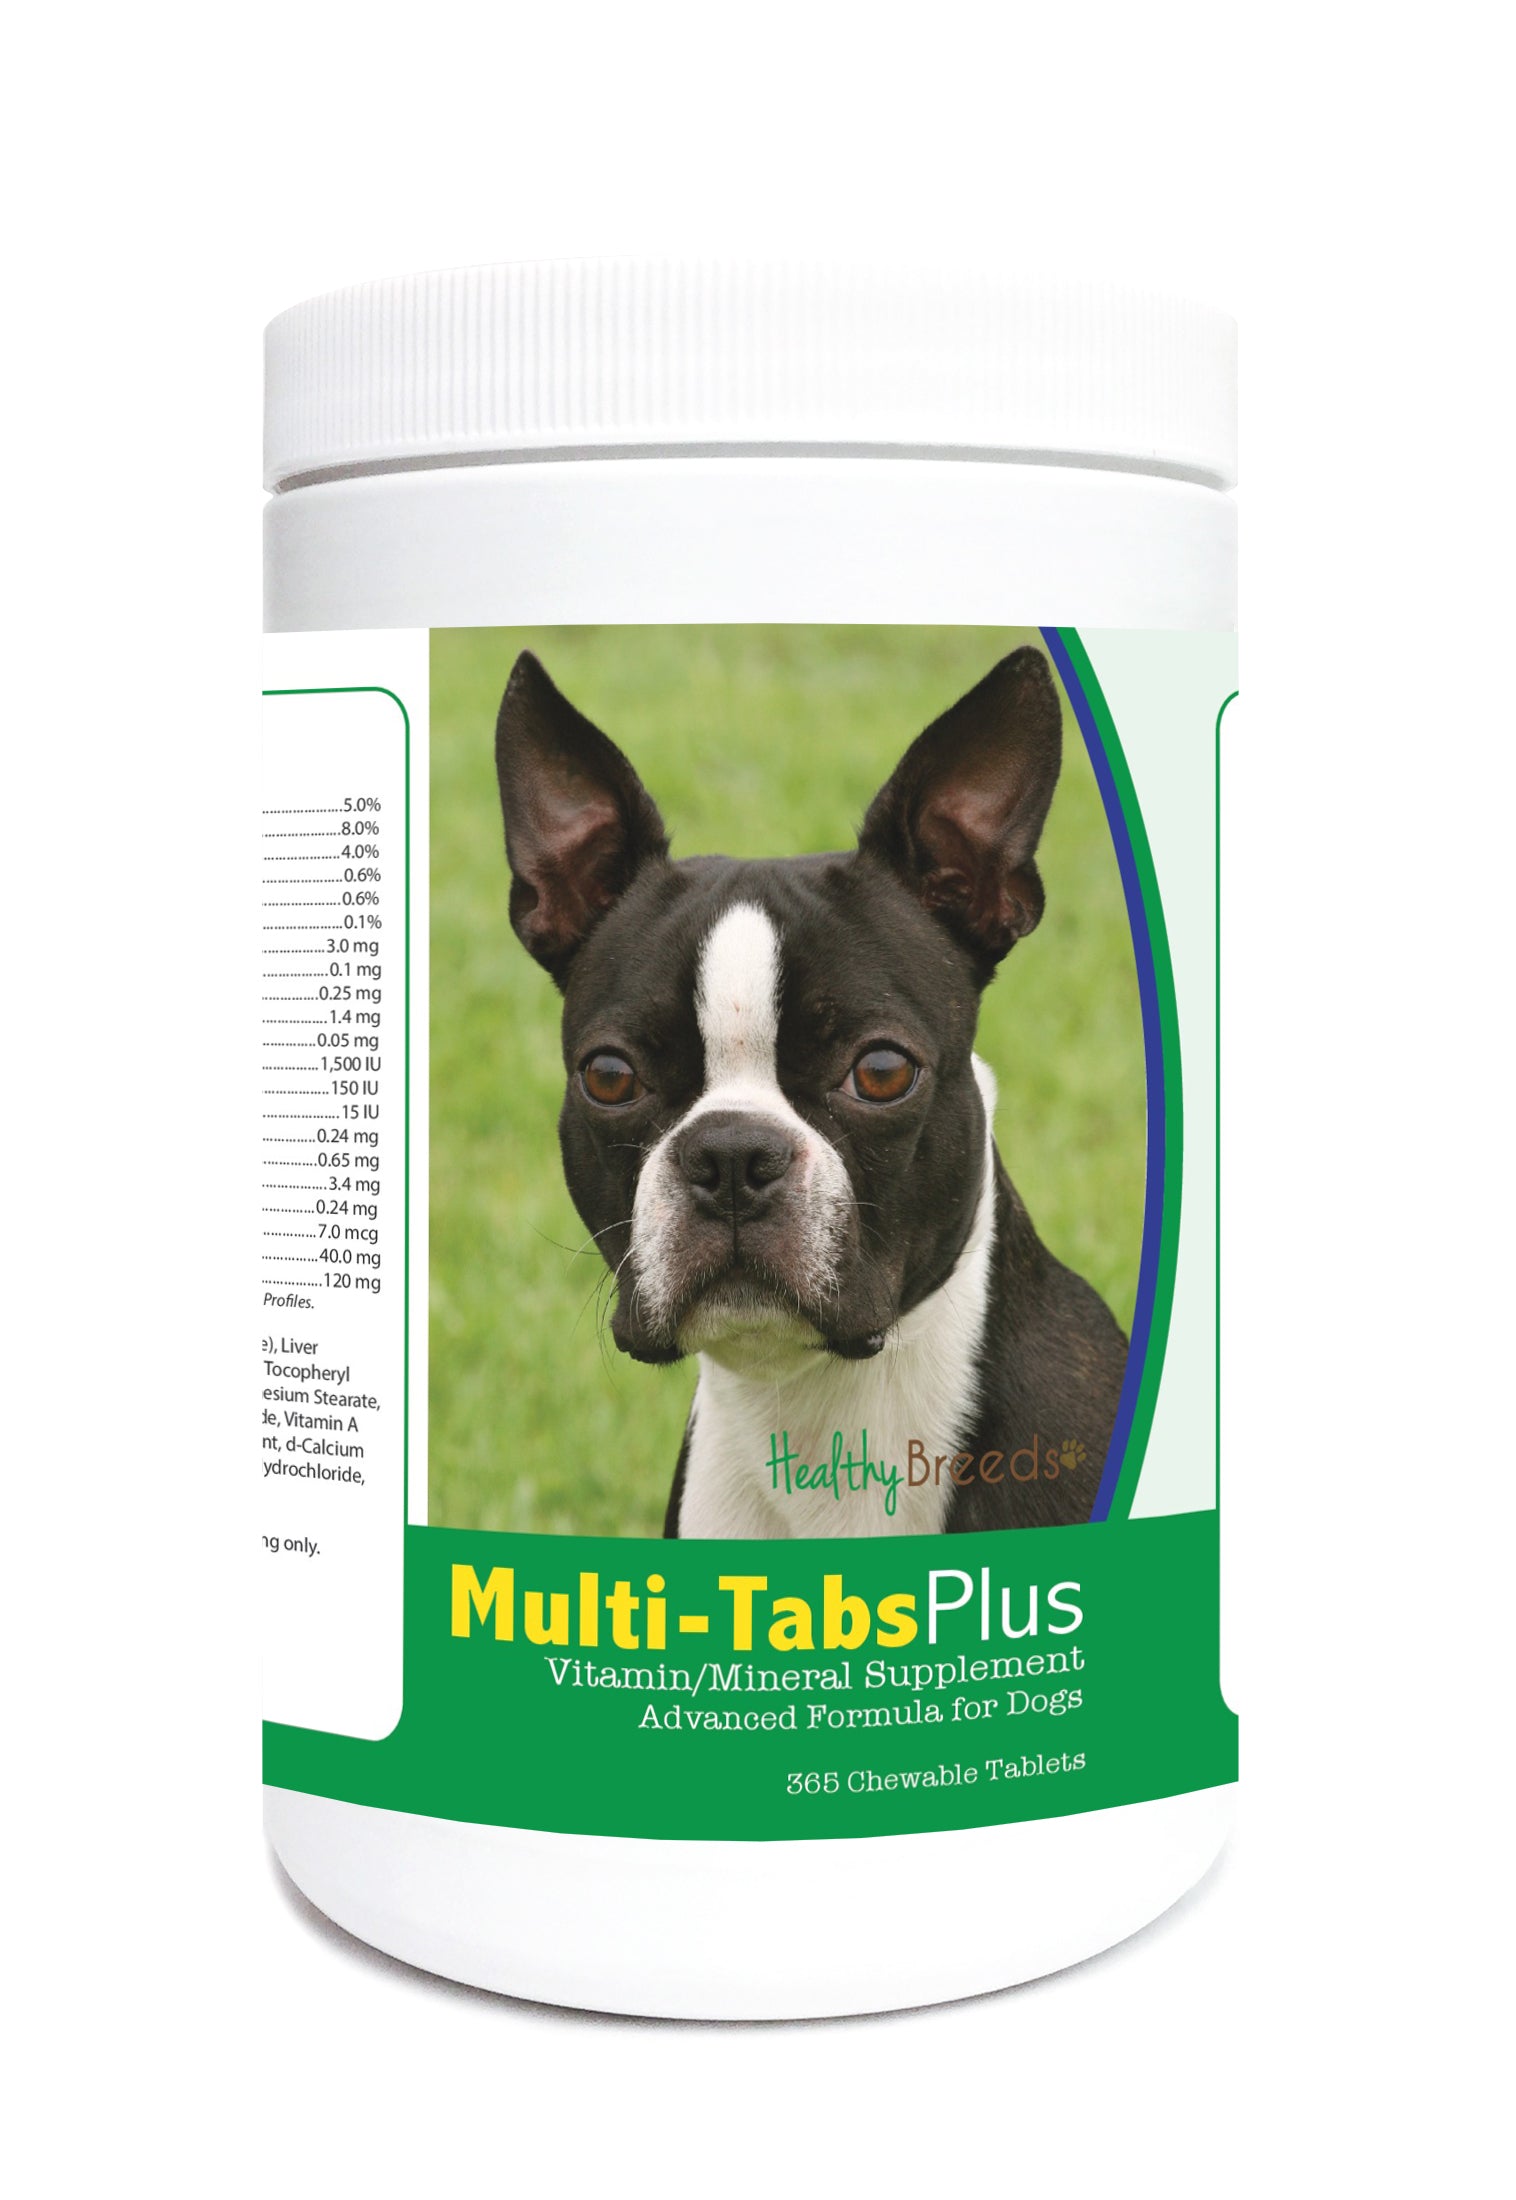 Boston Terrier Multi-Tabs Plus Chewable Tablets 365 Count